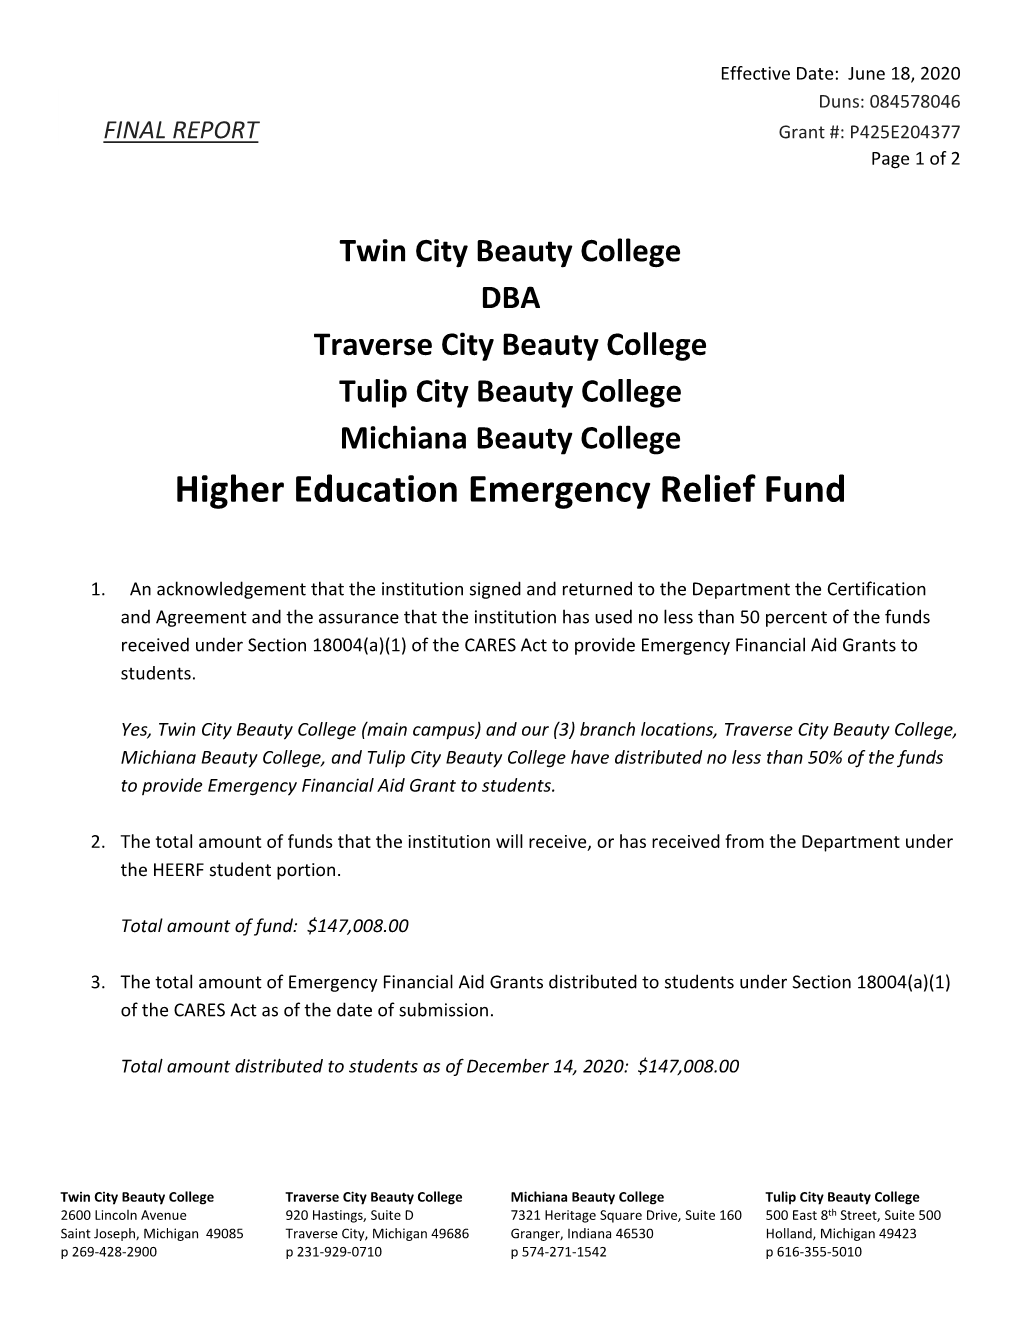 Higher Education Emergency Relief Fund